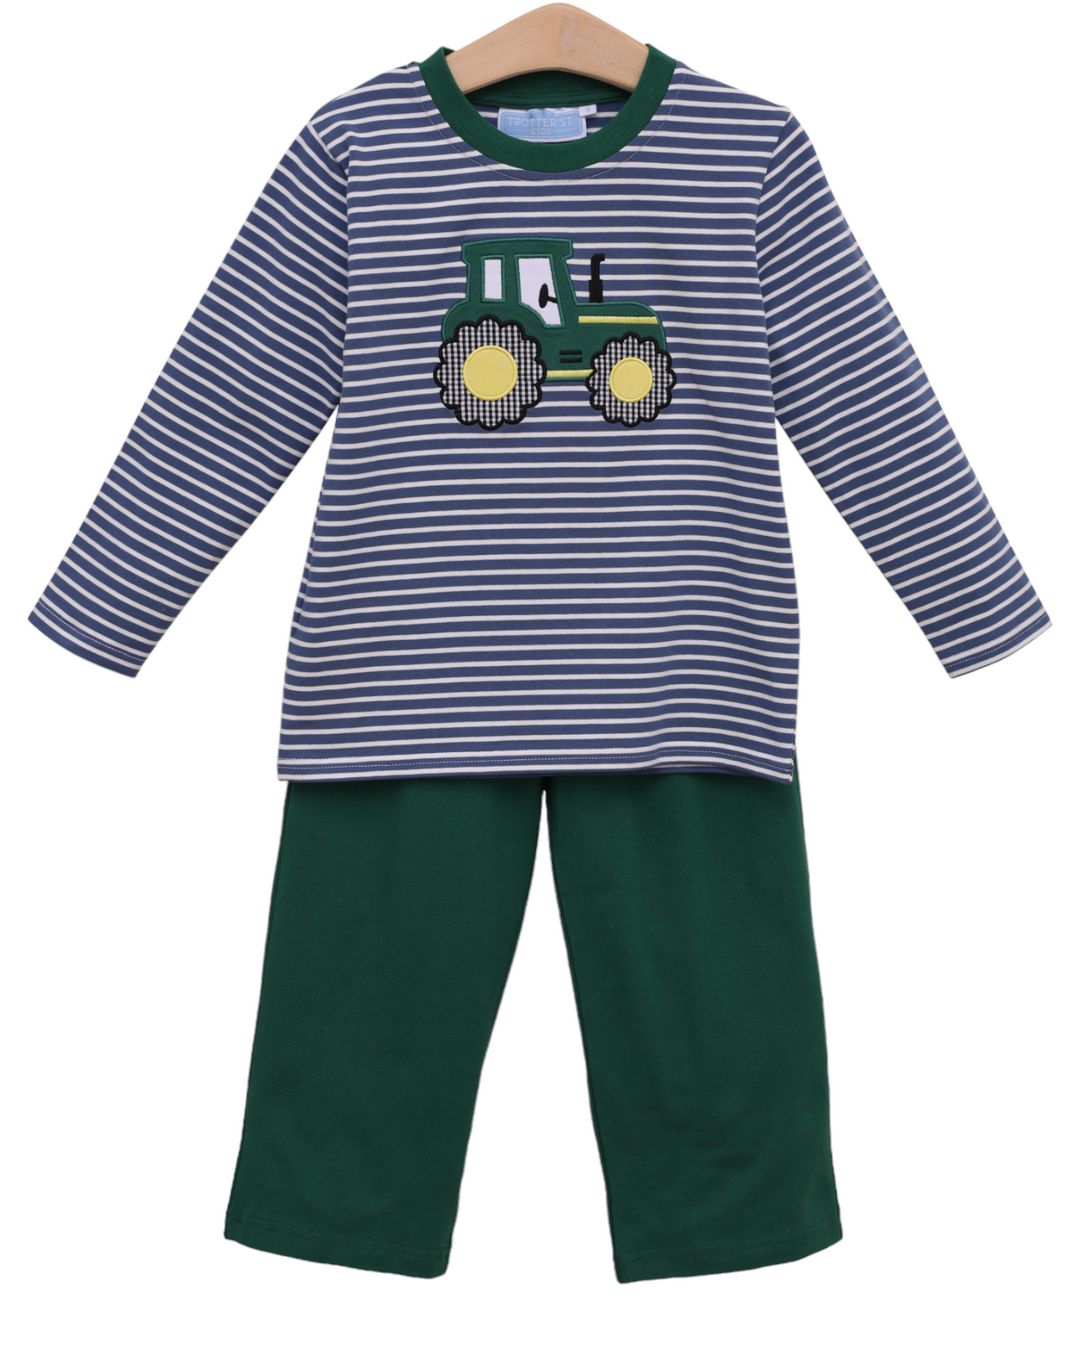 Tractor Blue and Green Stripe Boys Pants Set, front